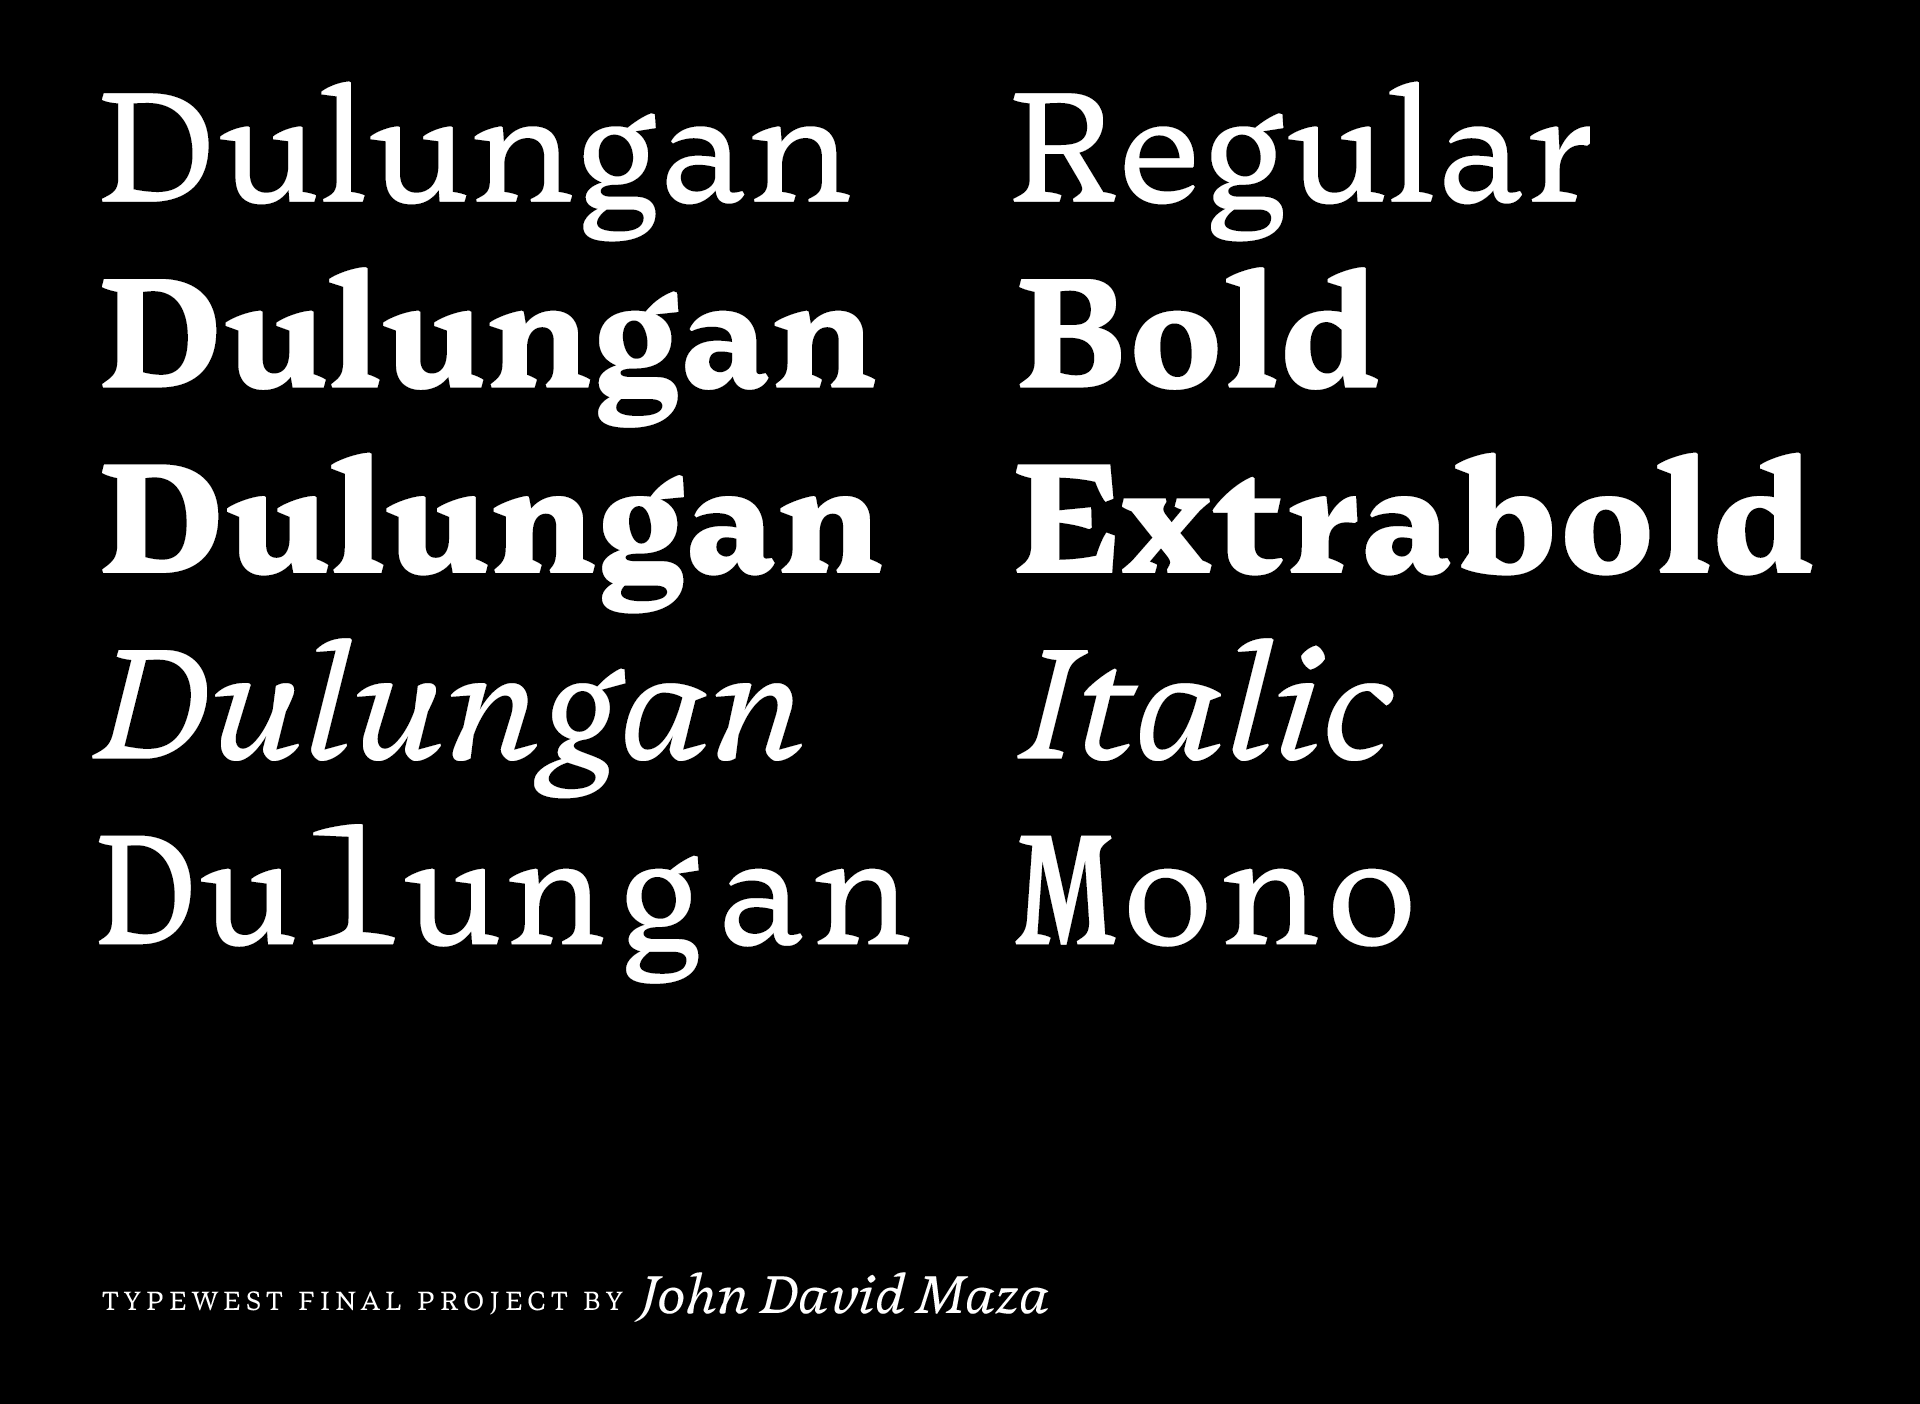 Dulungan is a type family for text composed of regular and bolder weights, plus italic and monospaced styles.